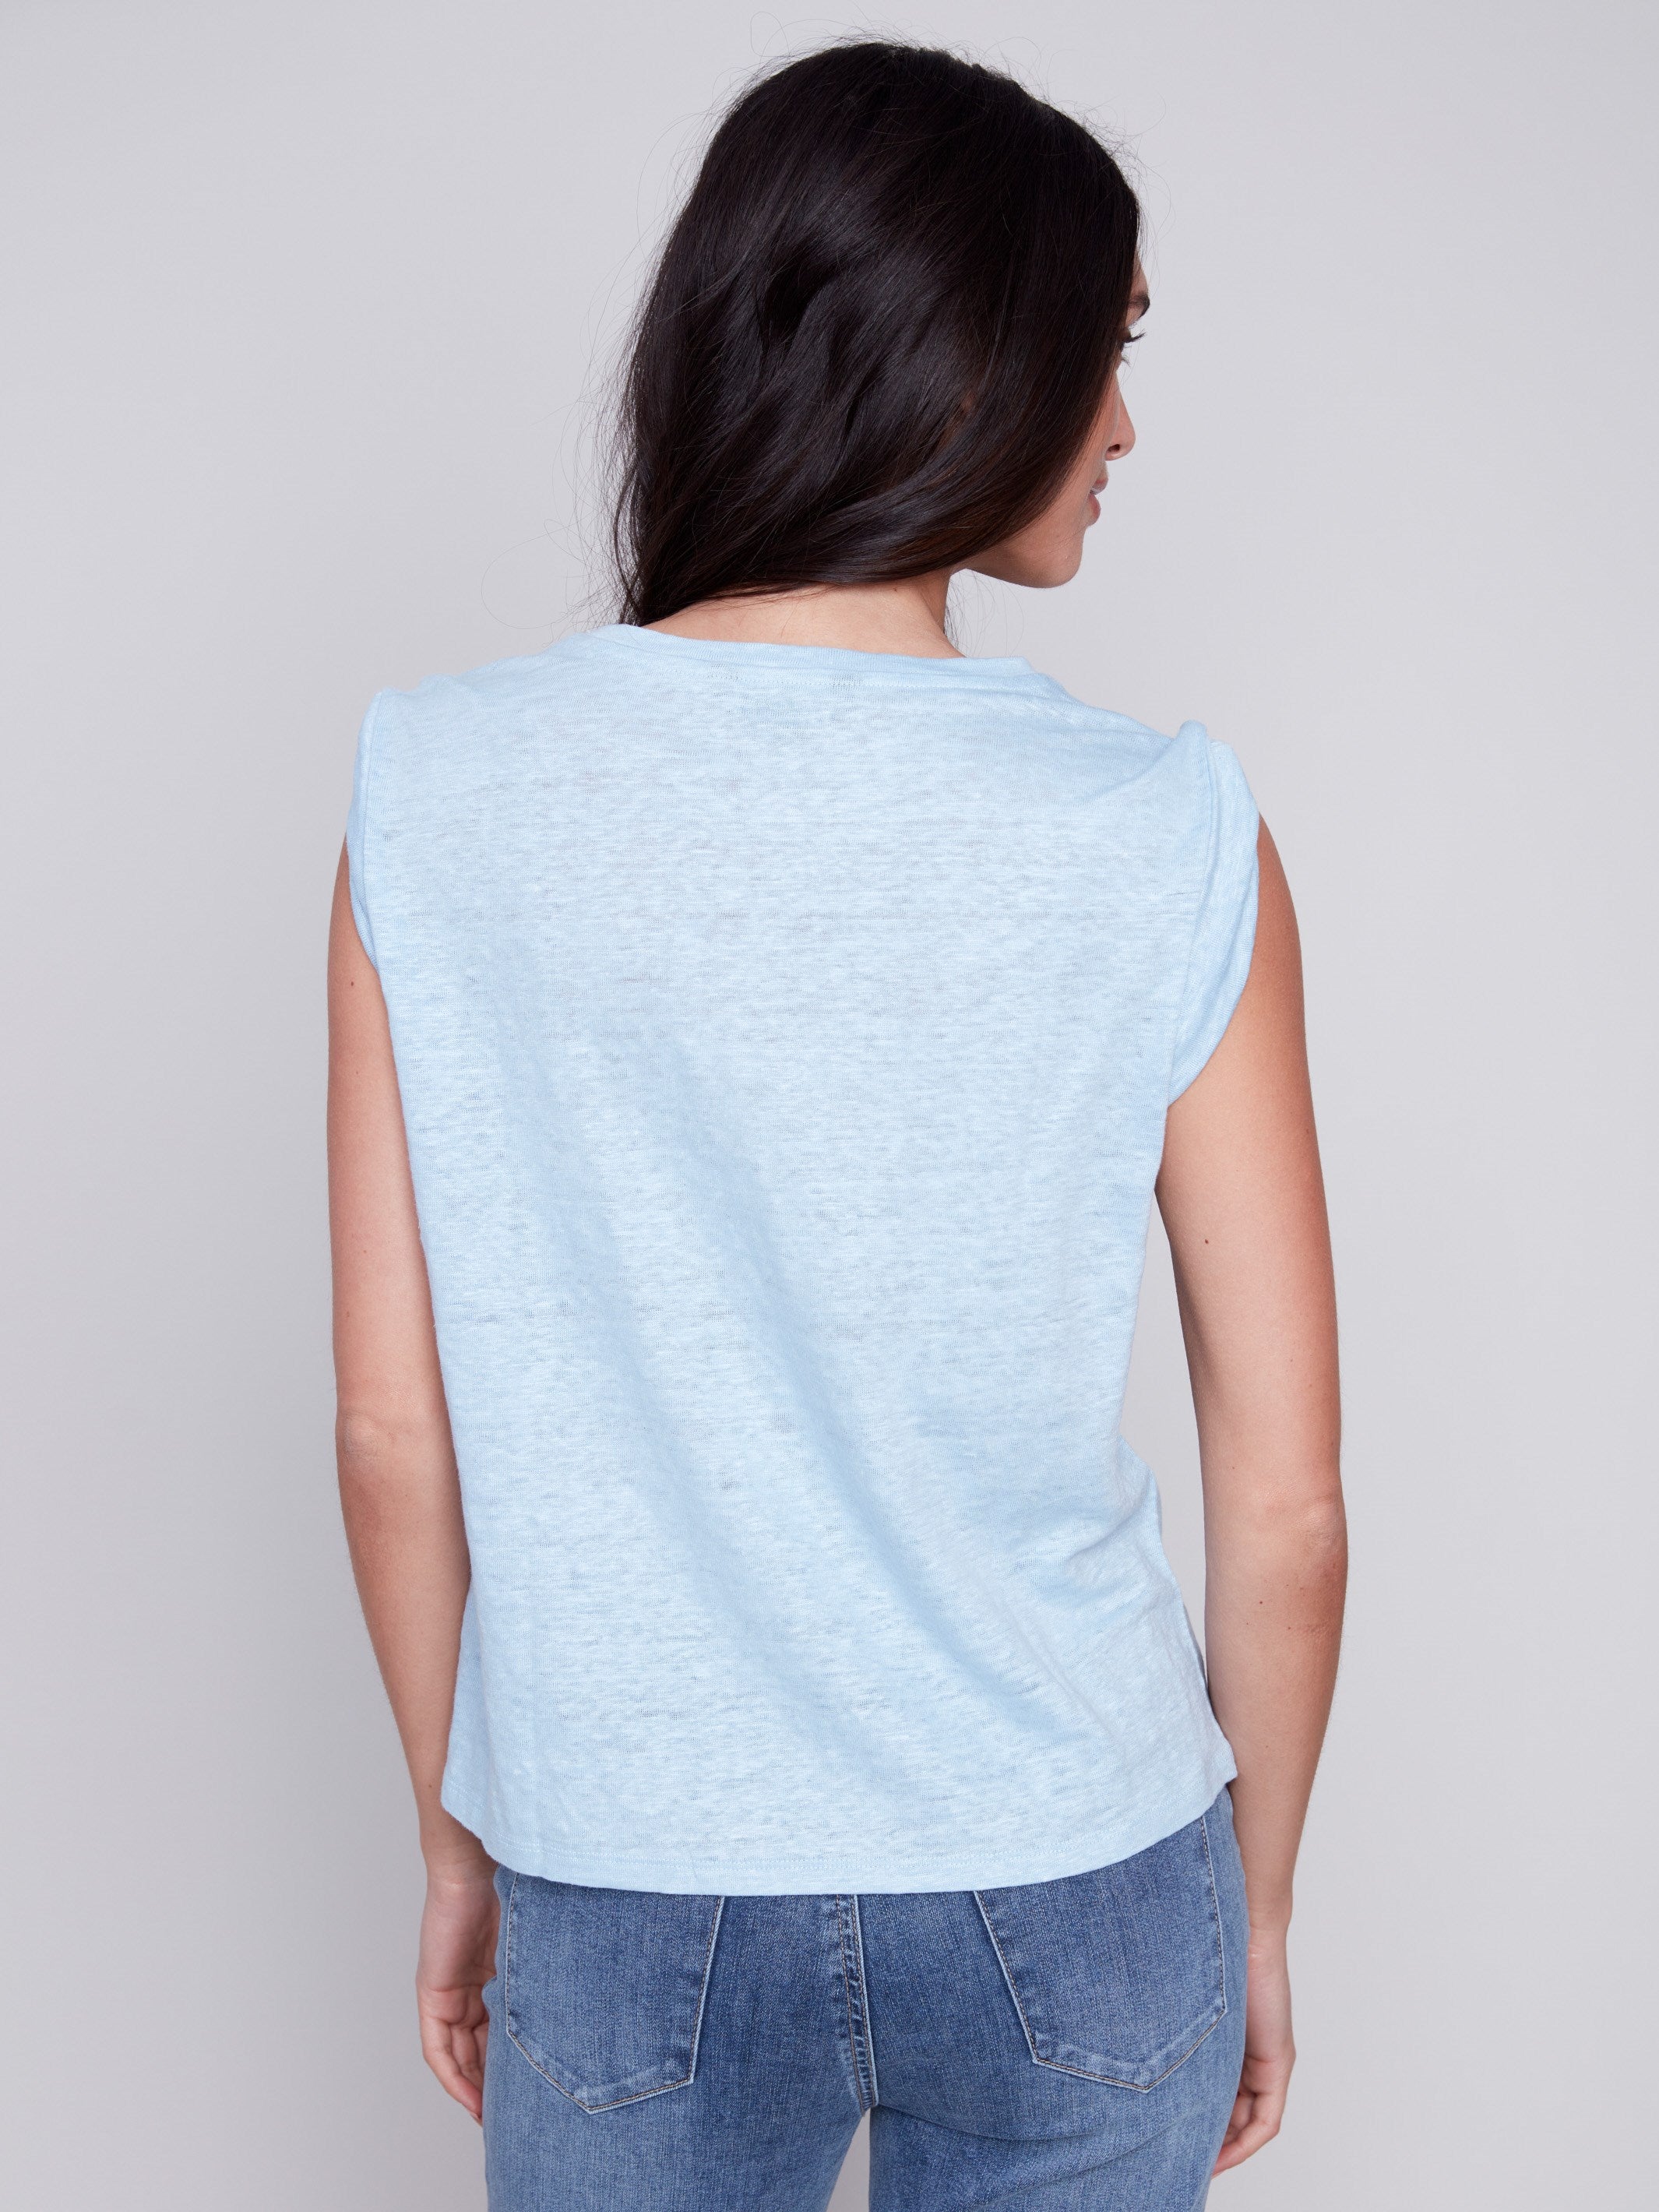 Charlie B Linen Tank Top with Sleeve Detail - Sky - Image 2